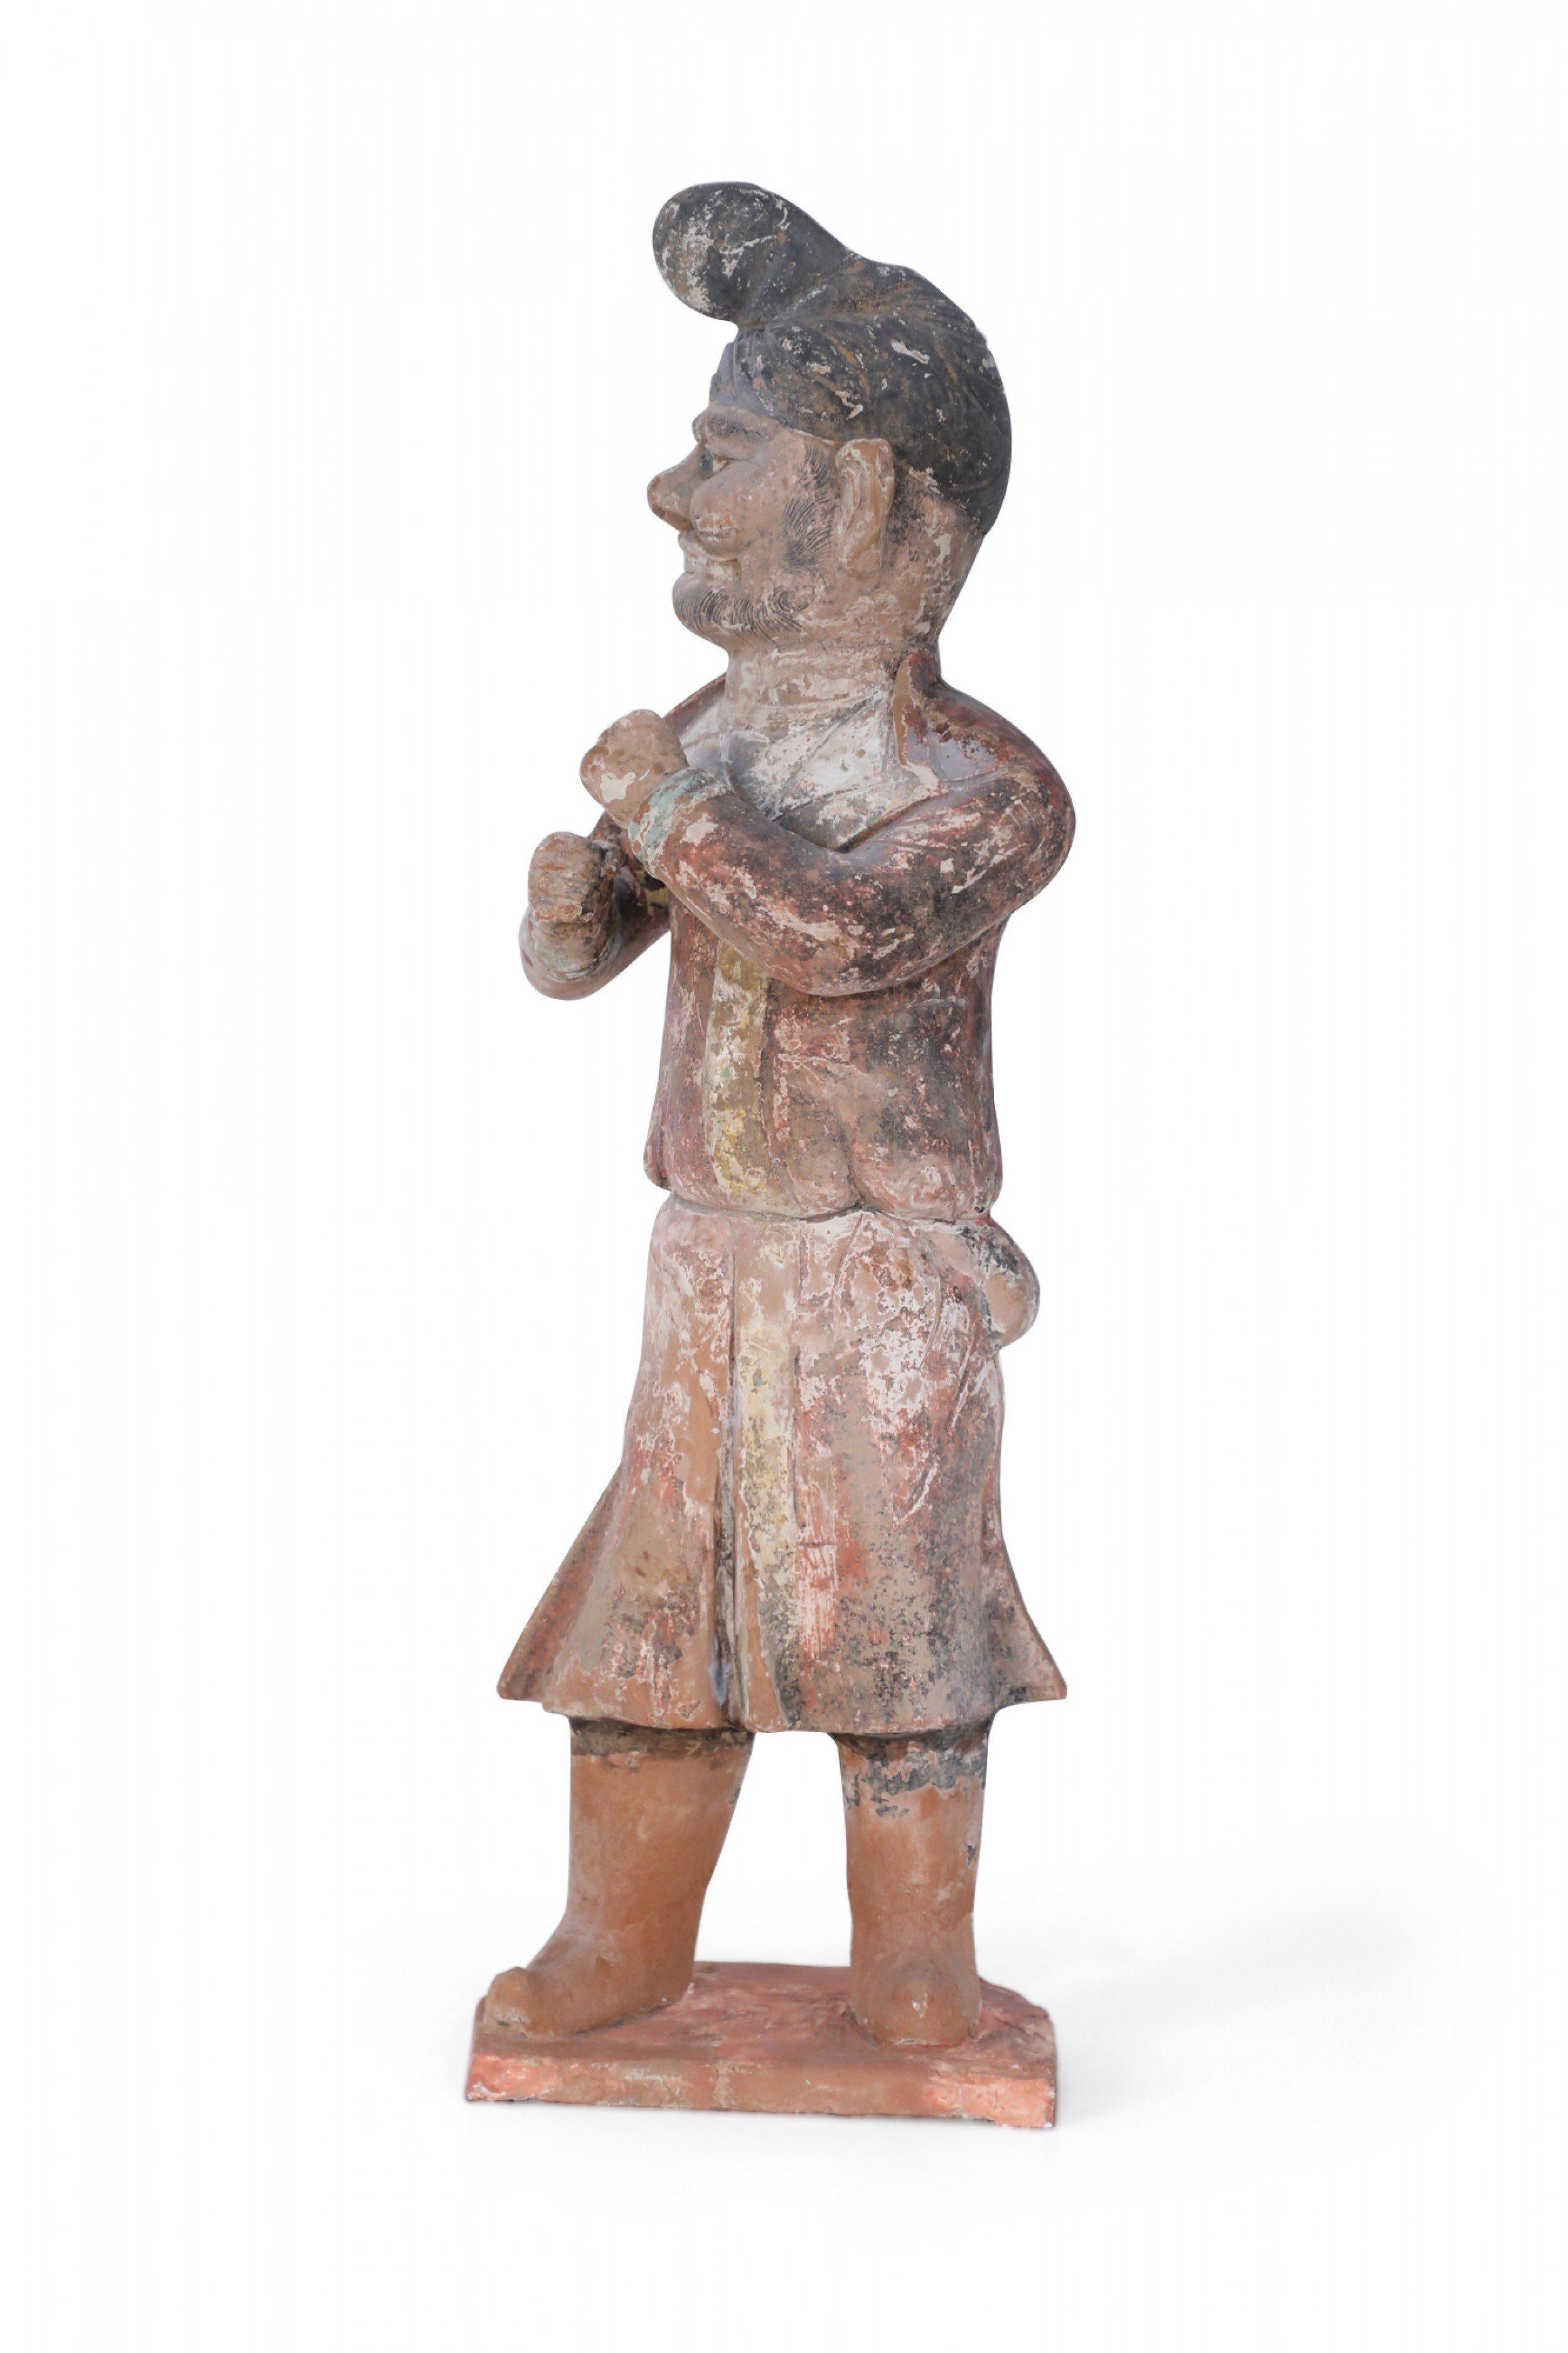 Antique Chinese Tang Dynasty-style terracotta tomb figure of a man with his fists raised, wearing a hat or a head wrap and boots, and standing on a faceted rust-colored base.
 